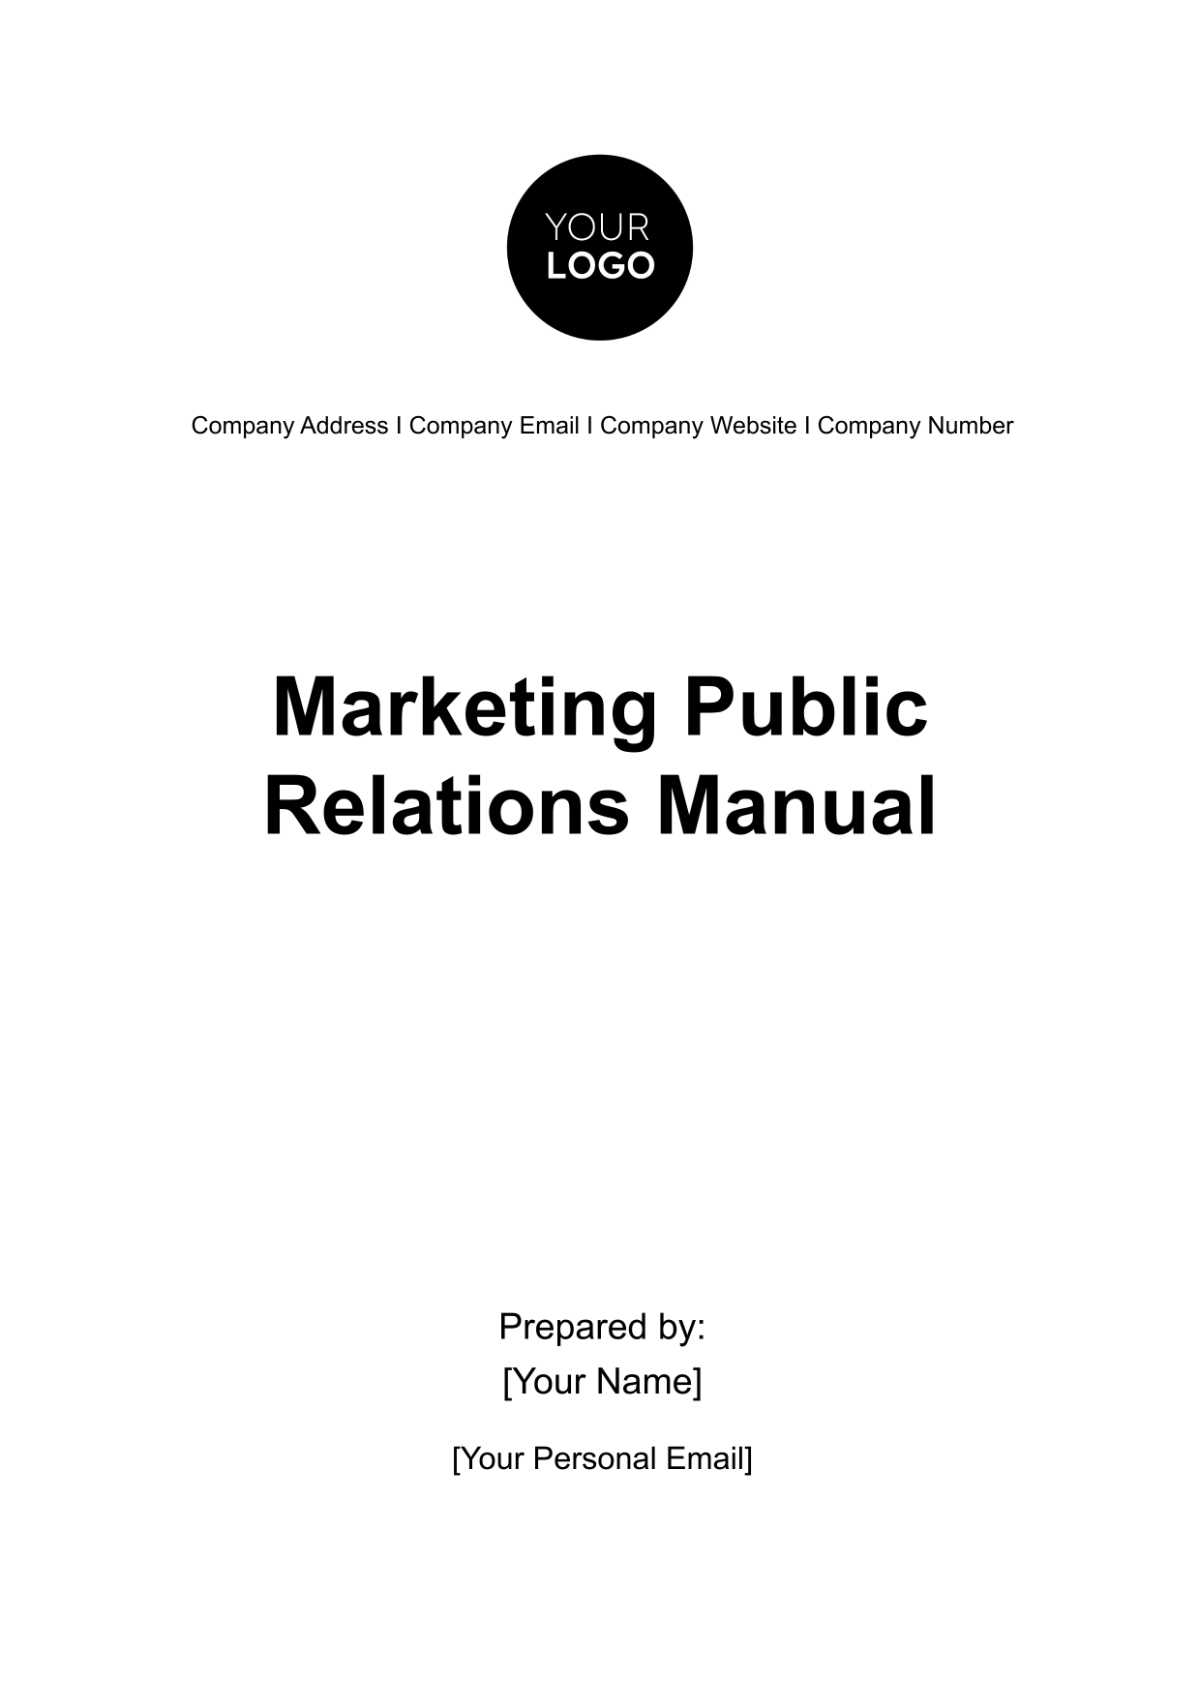 Marketing Public Relations Manual Template